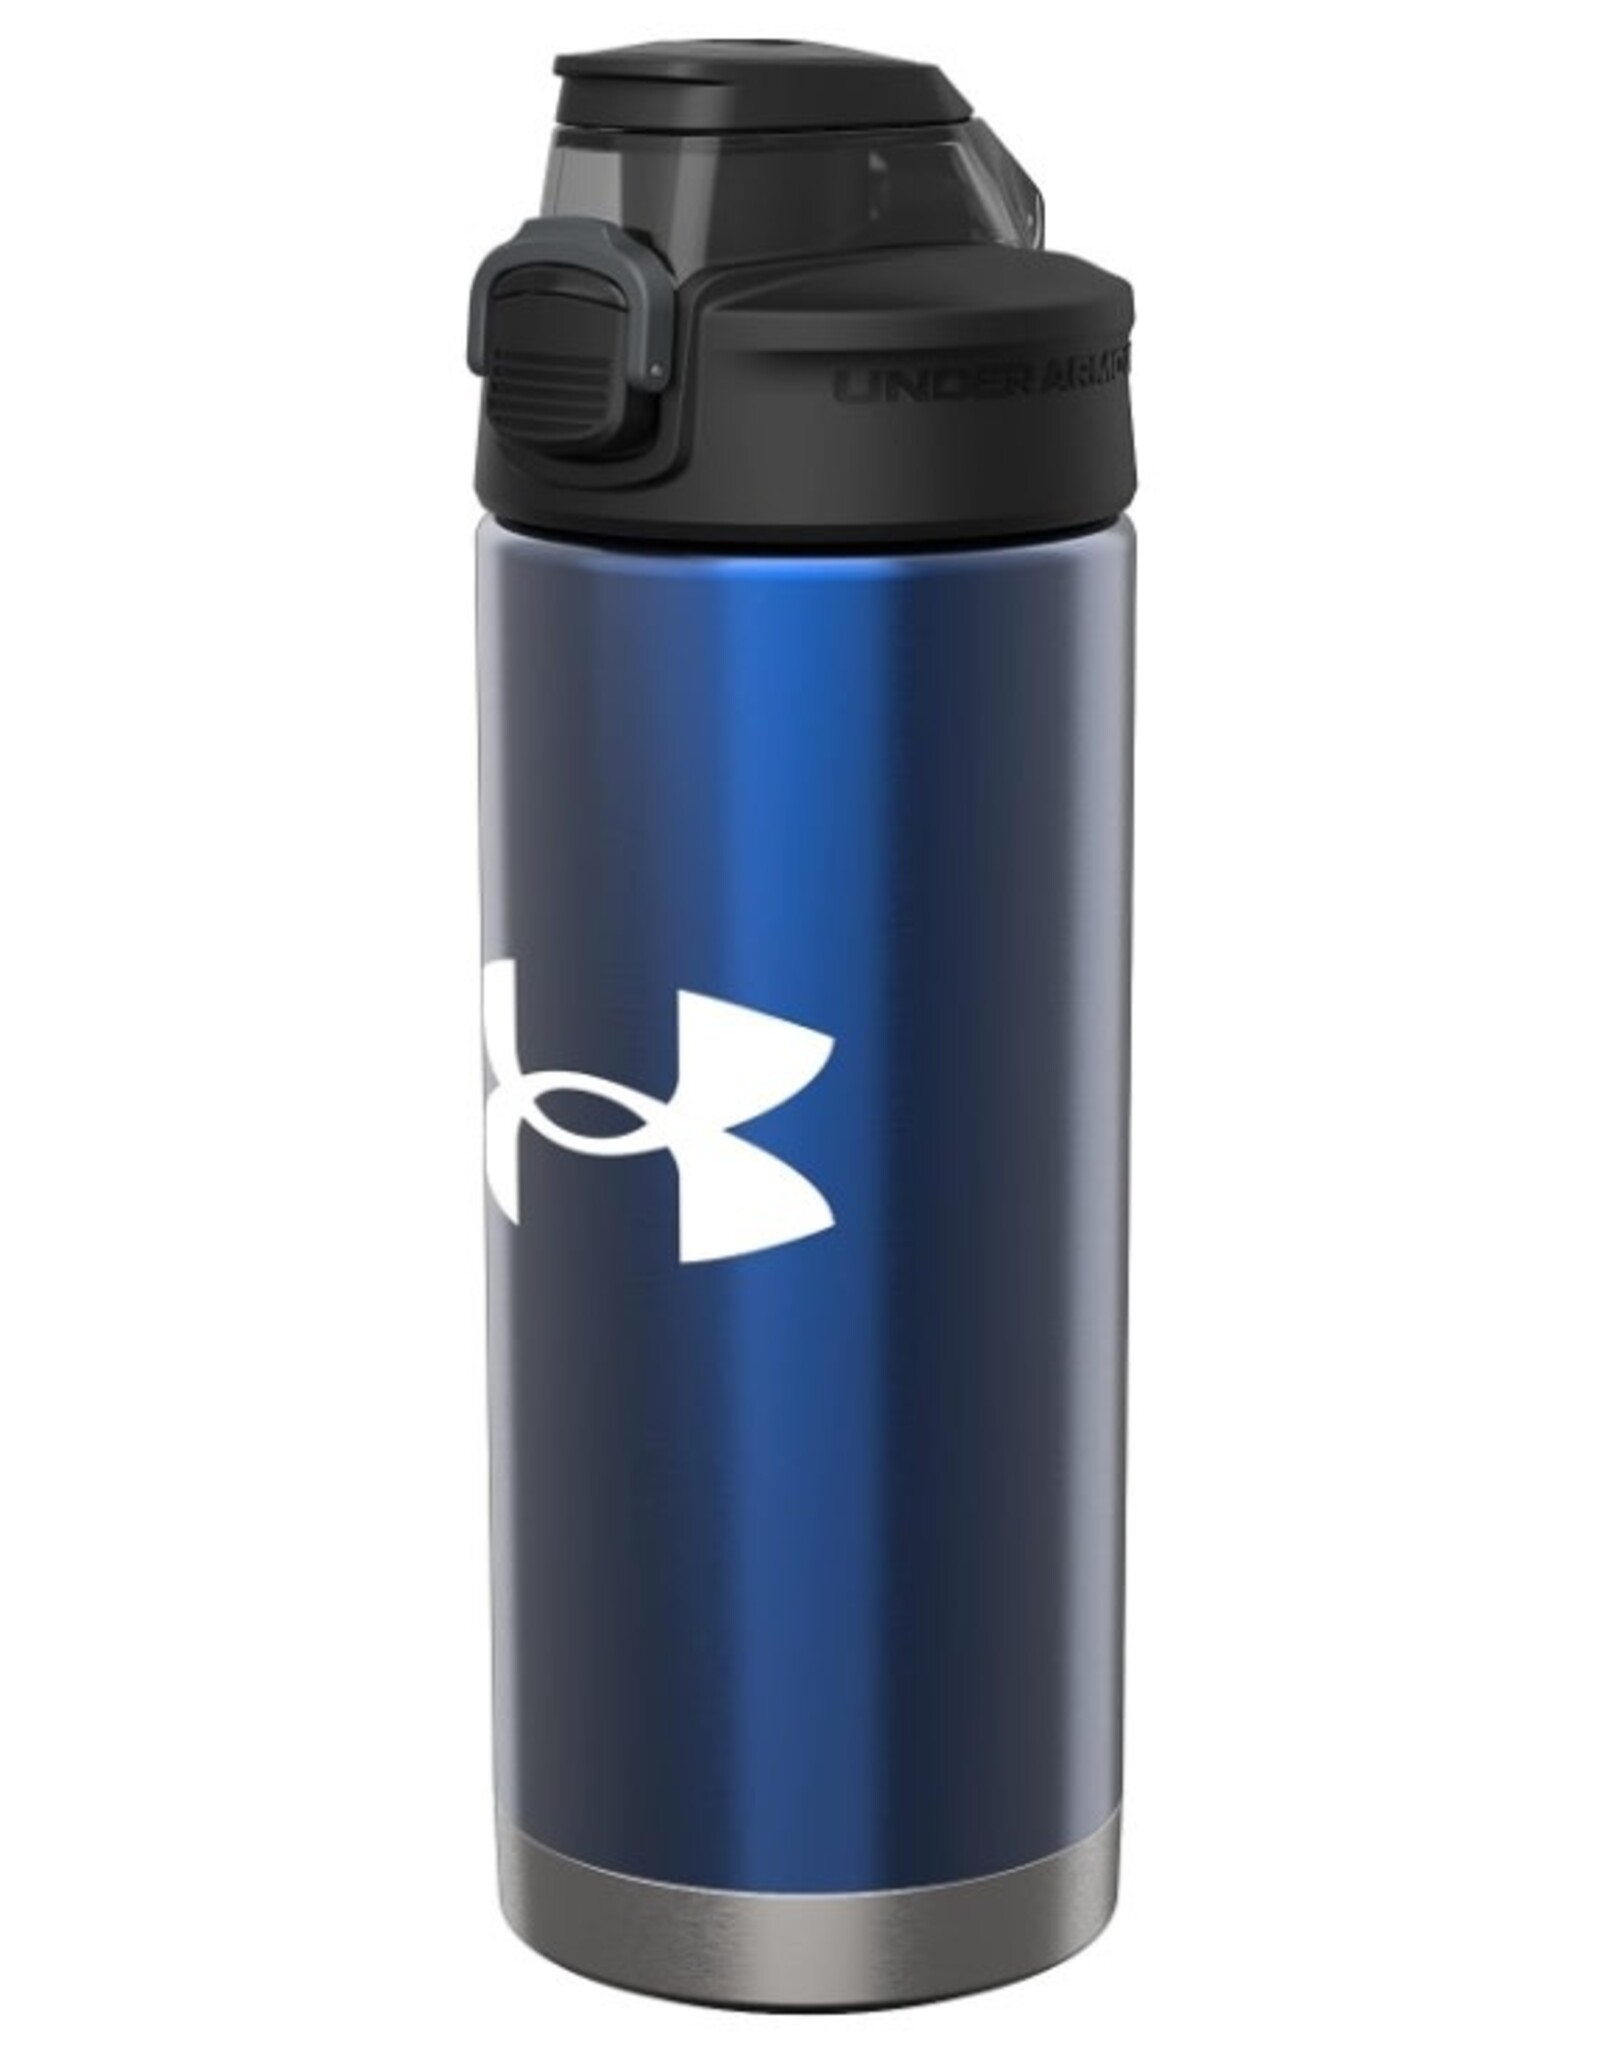 Under Armour UA 160z Protege Vacuum Insulated Stainless Steel Water Bottle